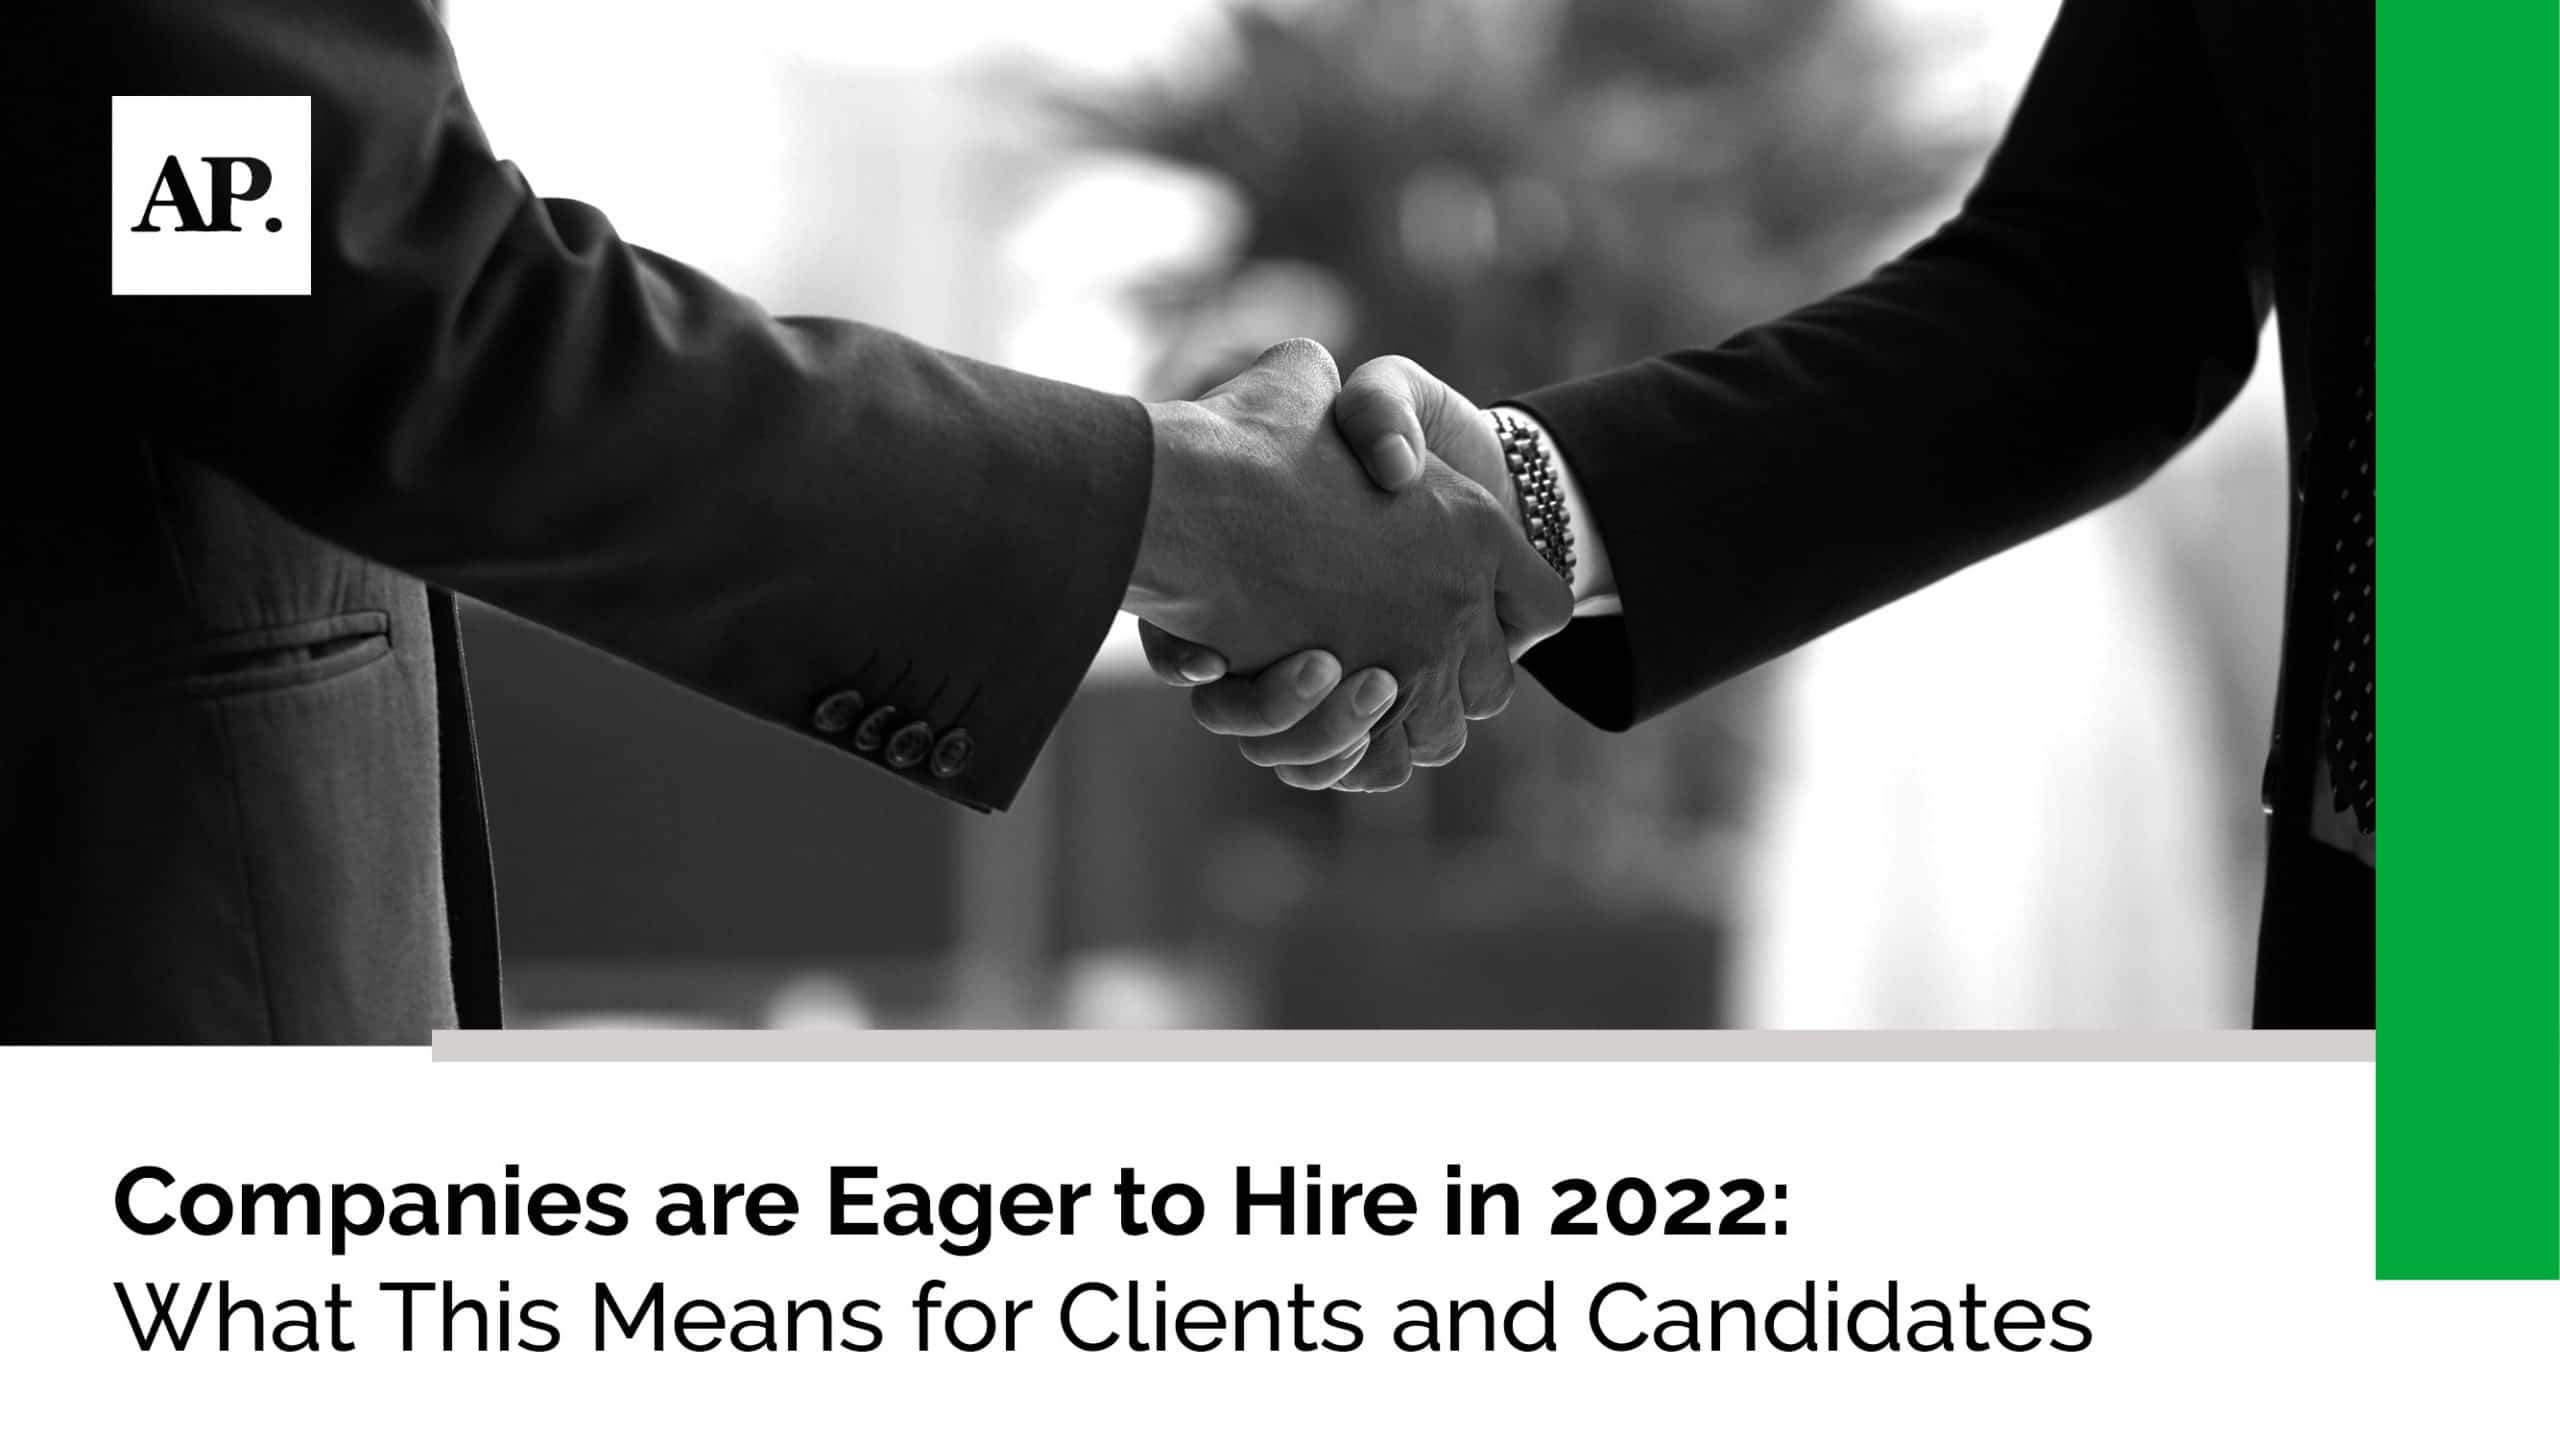 Companies Are Eager to Hire in 2022: What This Means for Clients and Candidates